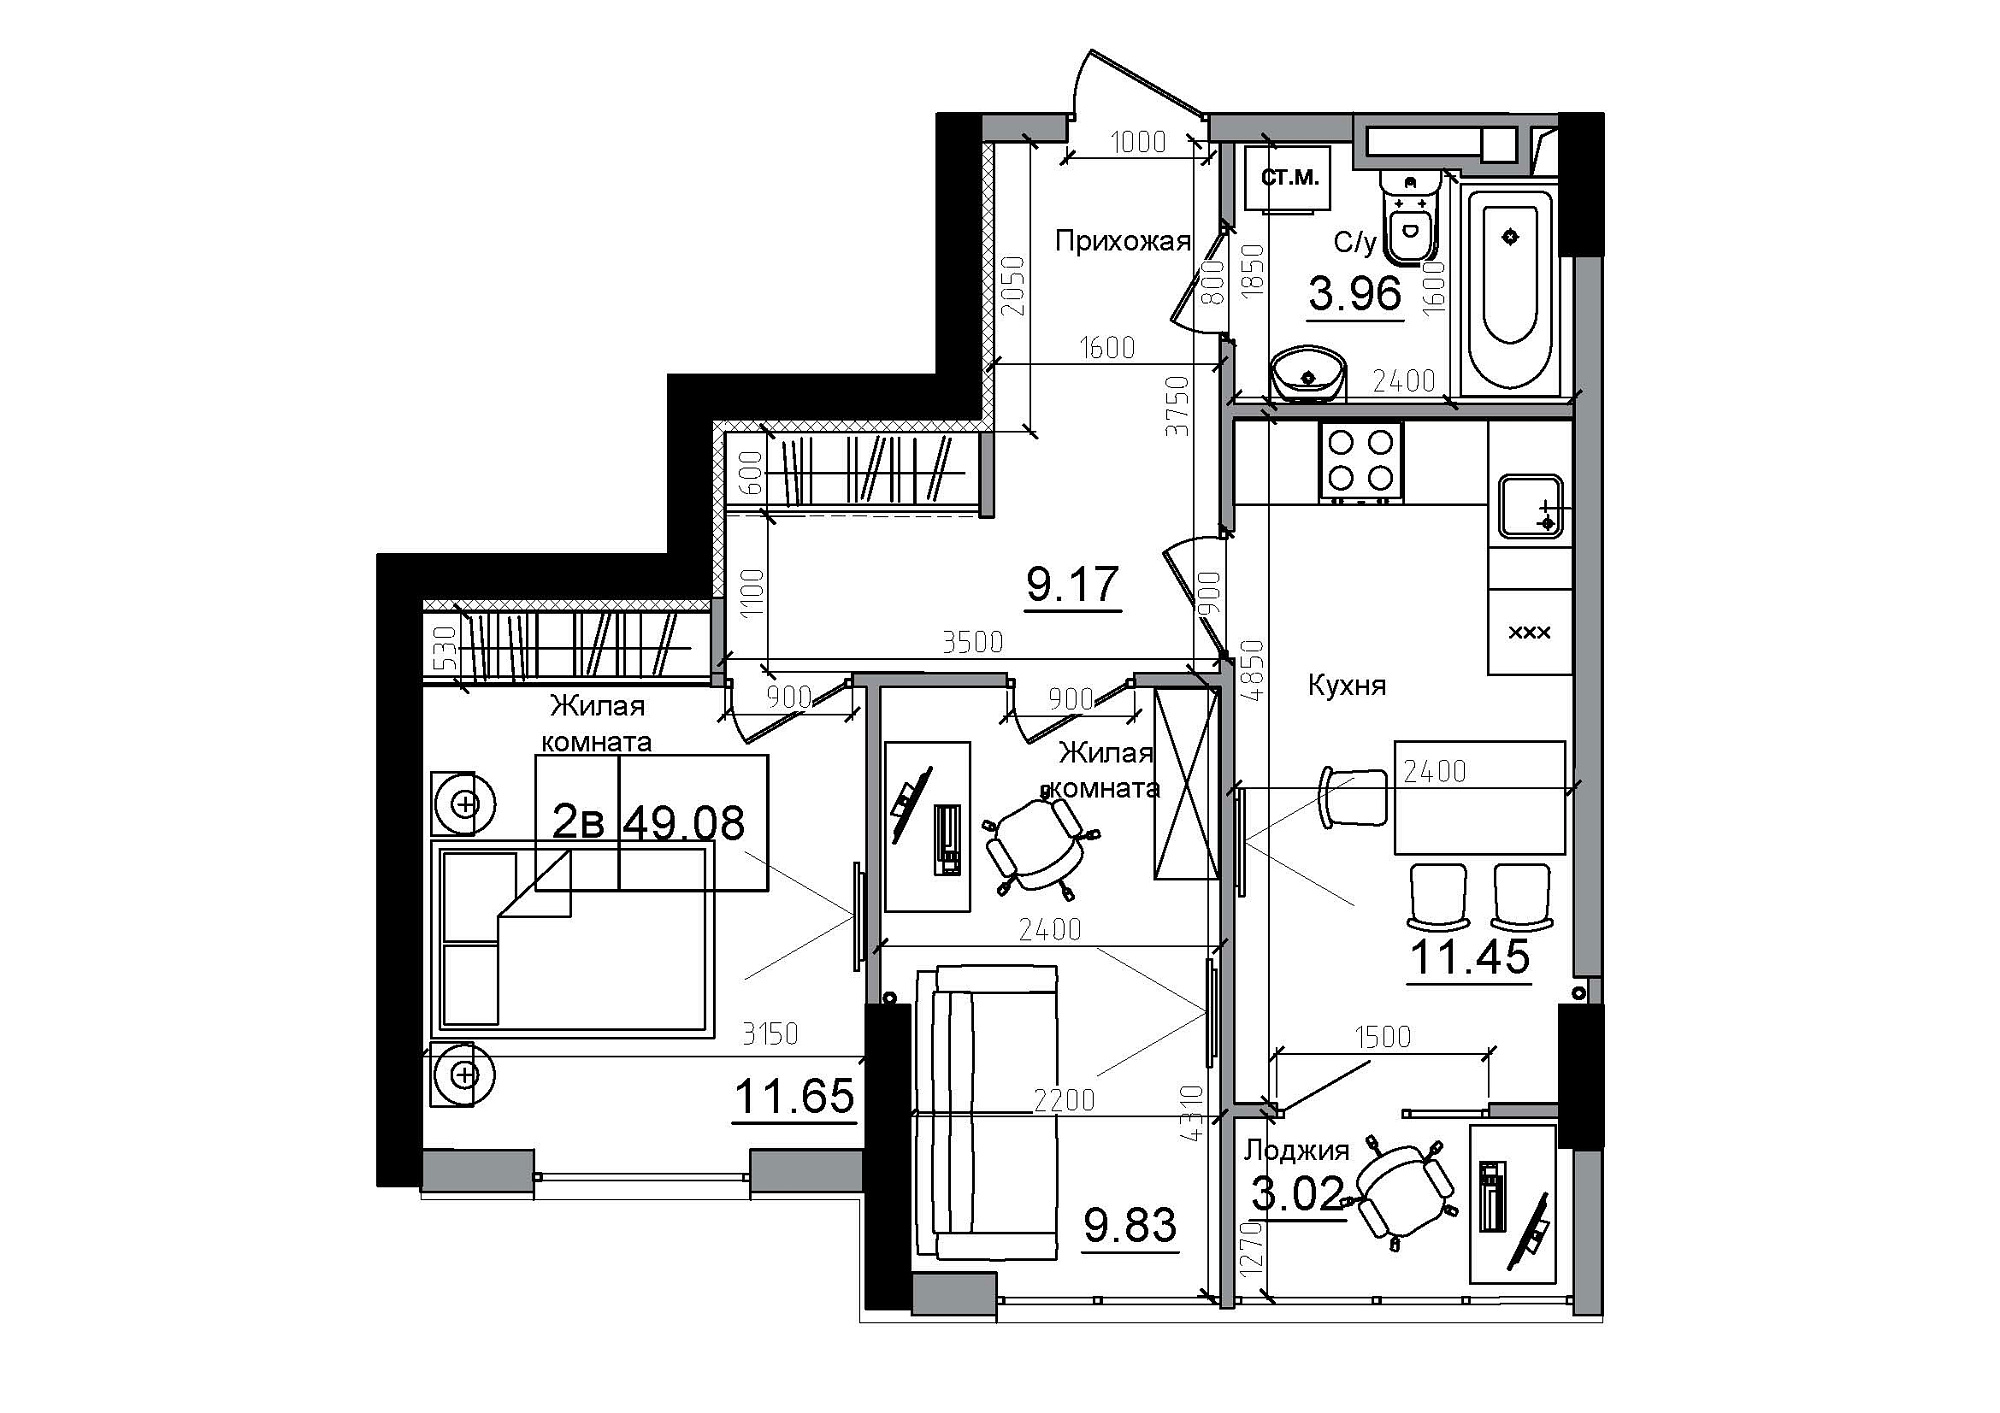 Planning 2-rm flats area 49.08m2, AB-12-04/00015.